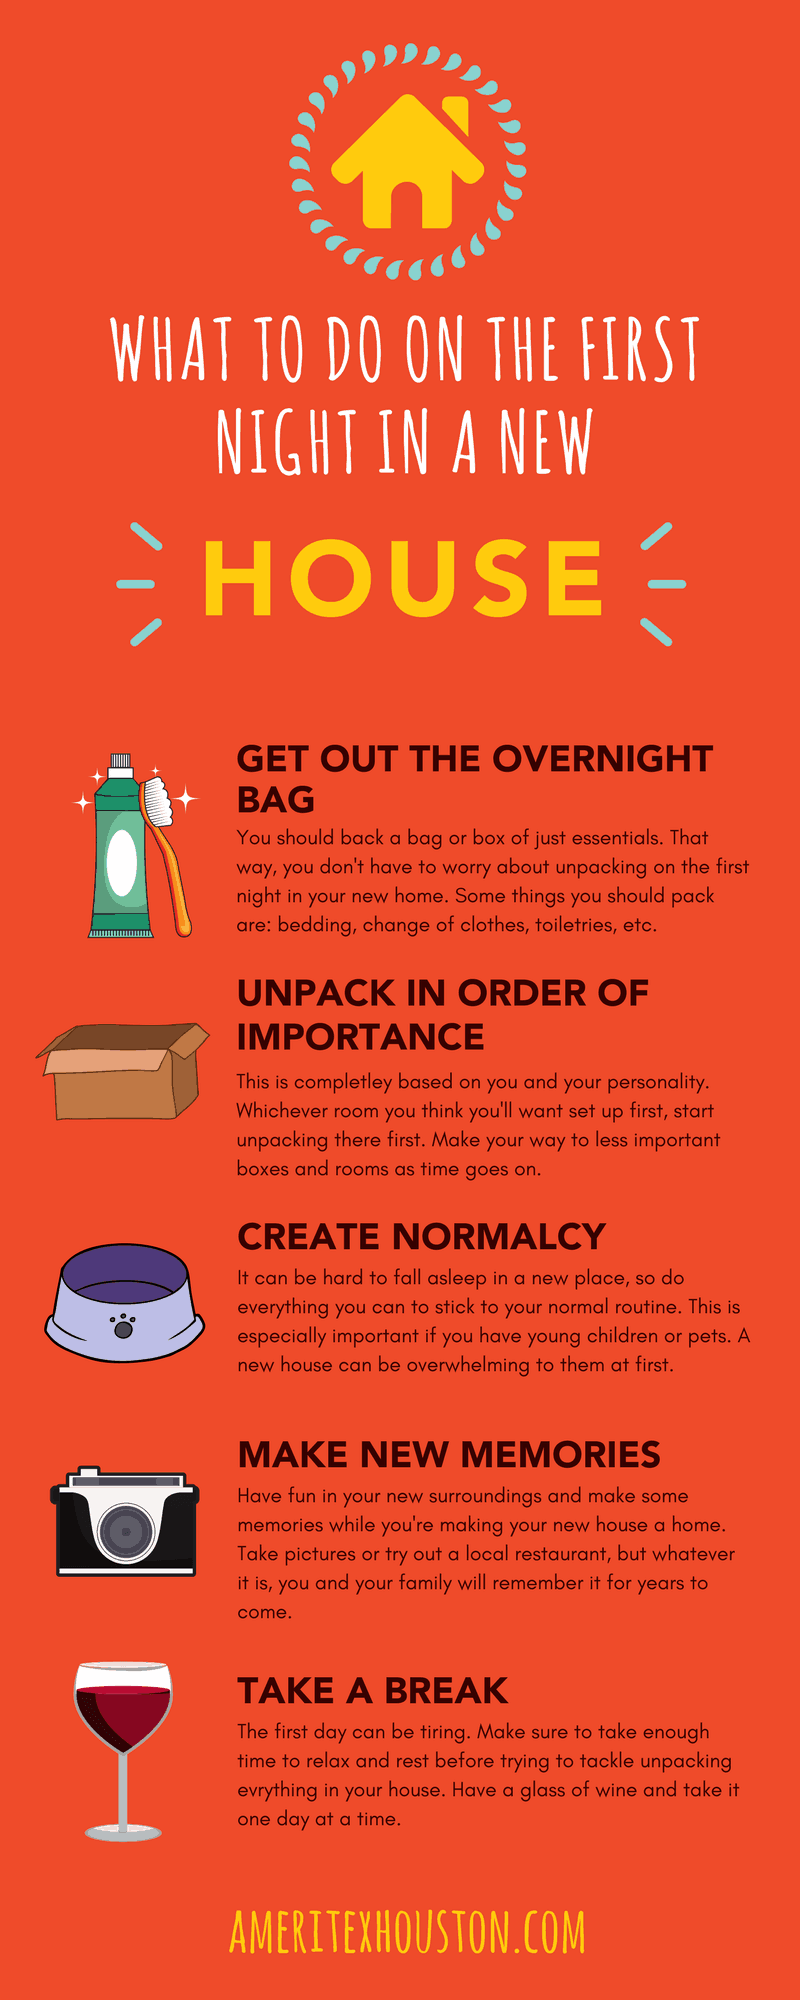 What to Pack for the First Night In My New Apartment